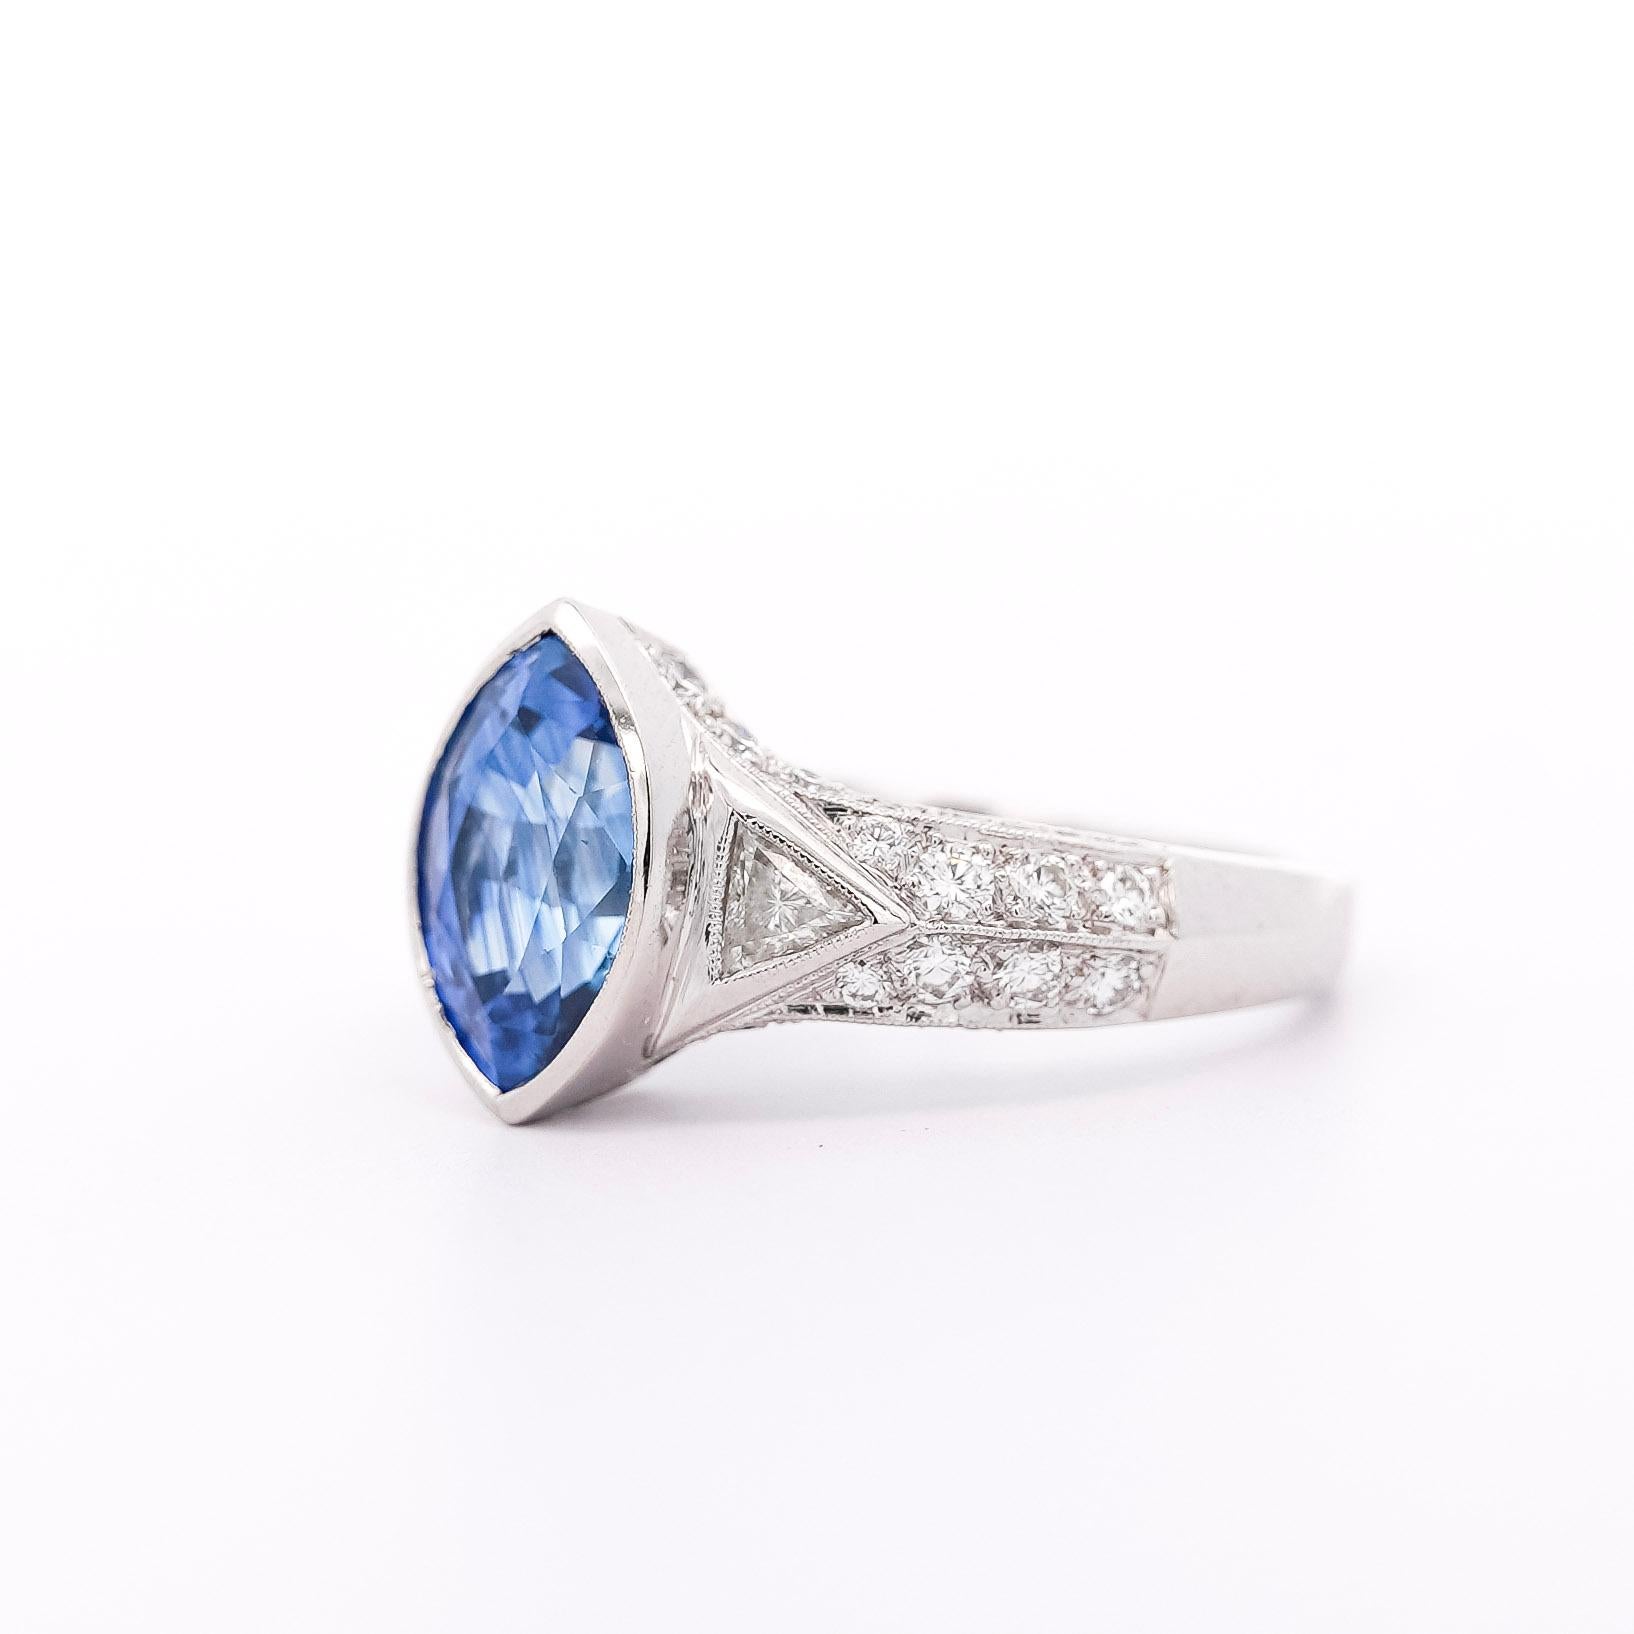 GIA Certified Vintage Sapphire and Diamond Platinum Ring. Ideal as a man's pinky ring or a woman's statement/engagement ring. 

This timeless ring features a marquise-cut blue Sapphire originating from Sri Lanka, it weighs 4 carats, and is of Sri